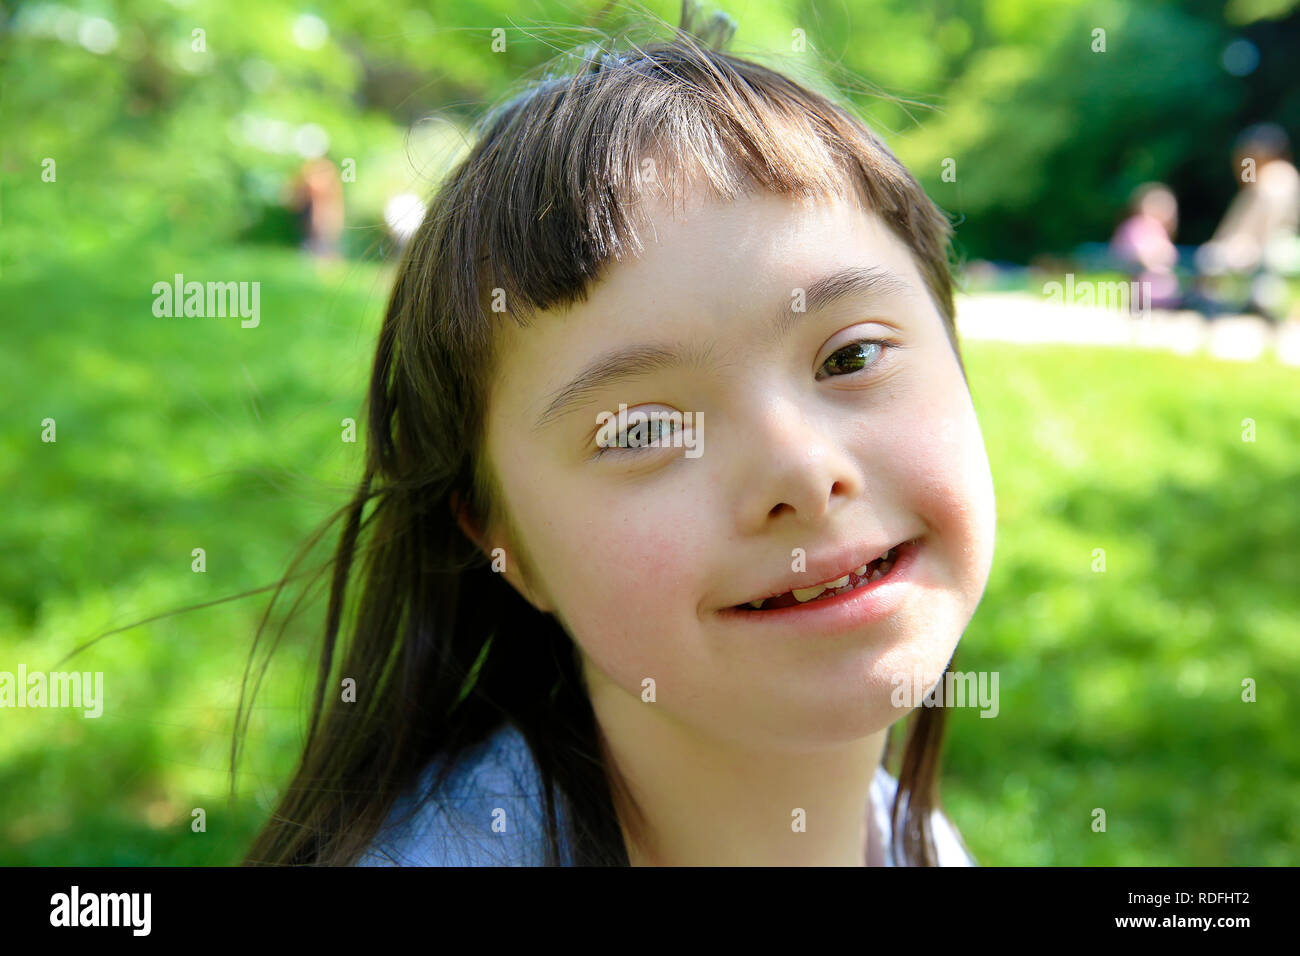 Portrait of little girl smiling in the park Stock Photo